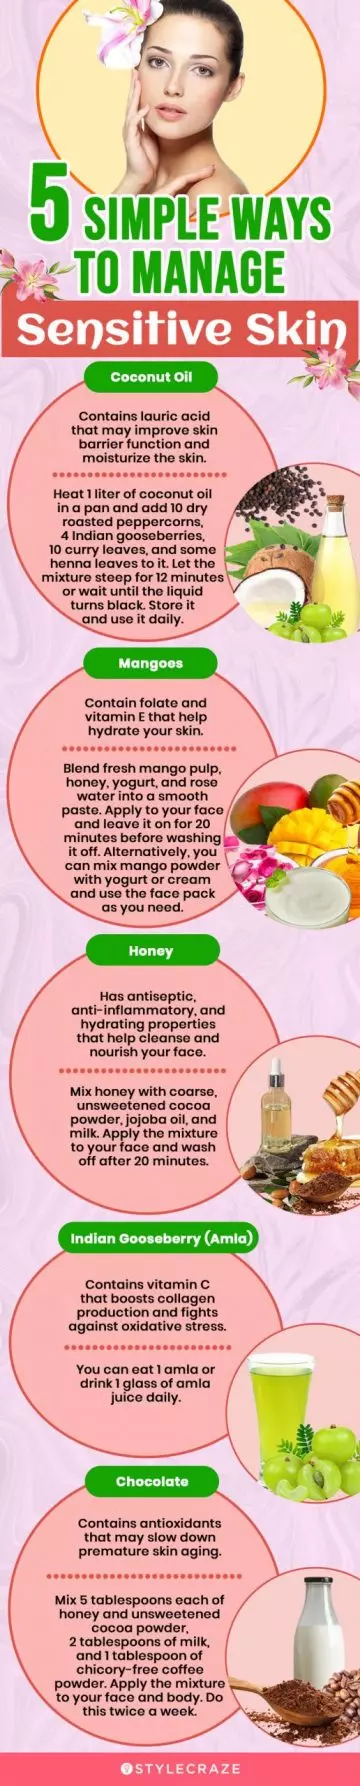 5 simple ways to manage sensitive skin (infographic)